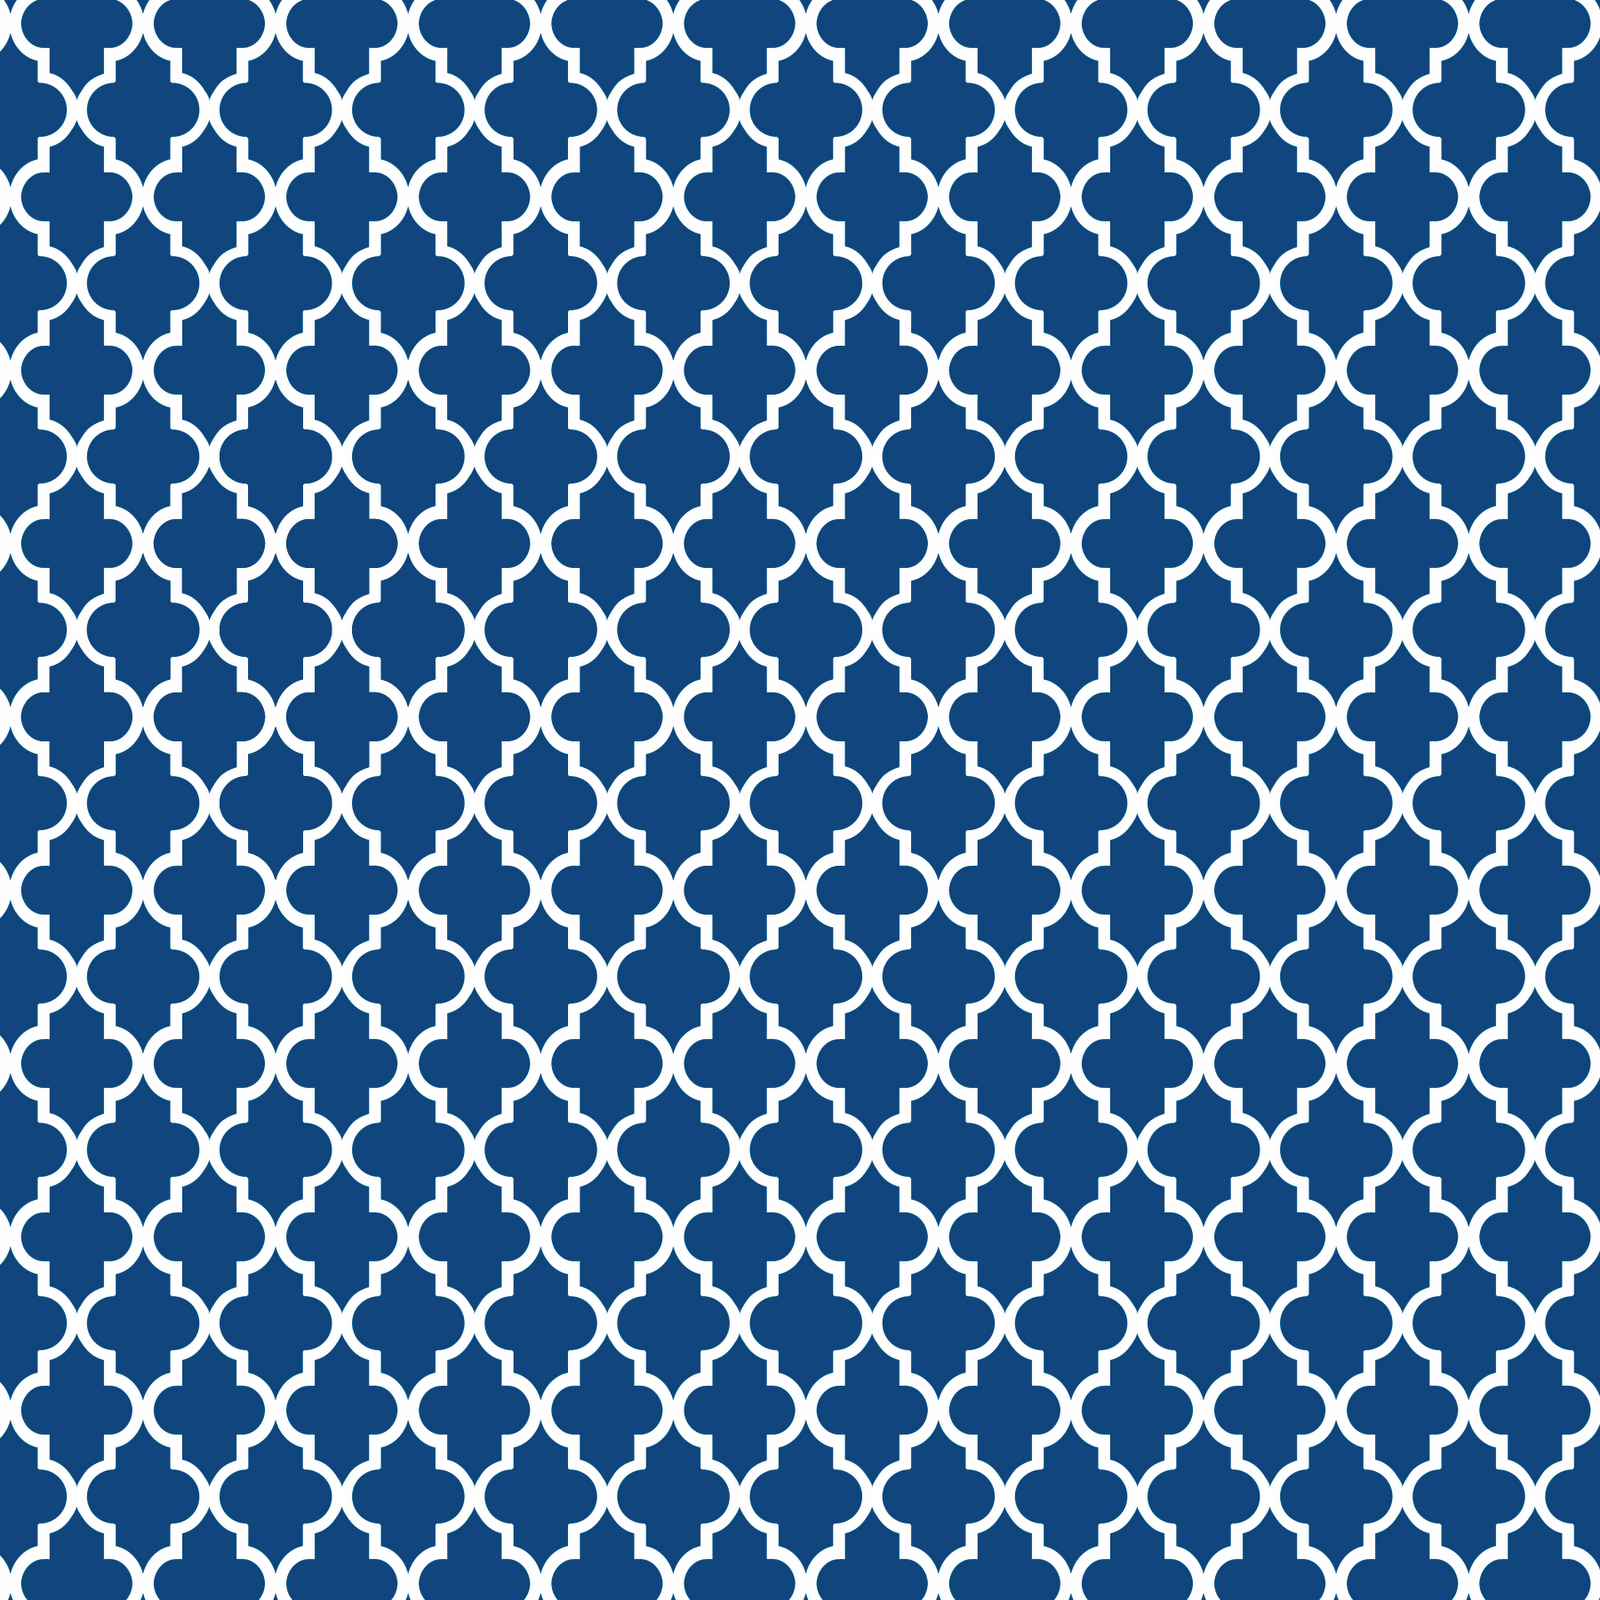 Free Printable Patterns (Click On Images And Save) | Printables - Free Printable Moroccan Pattern